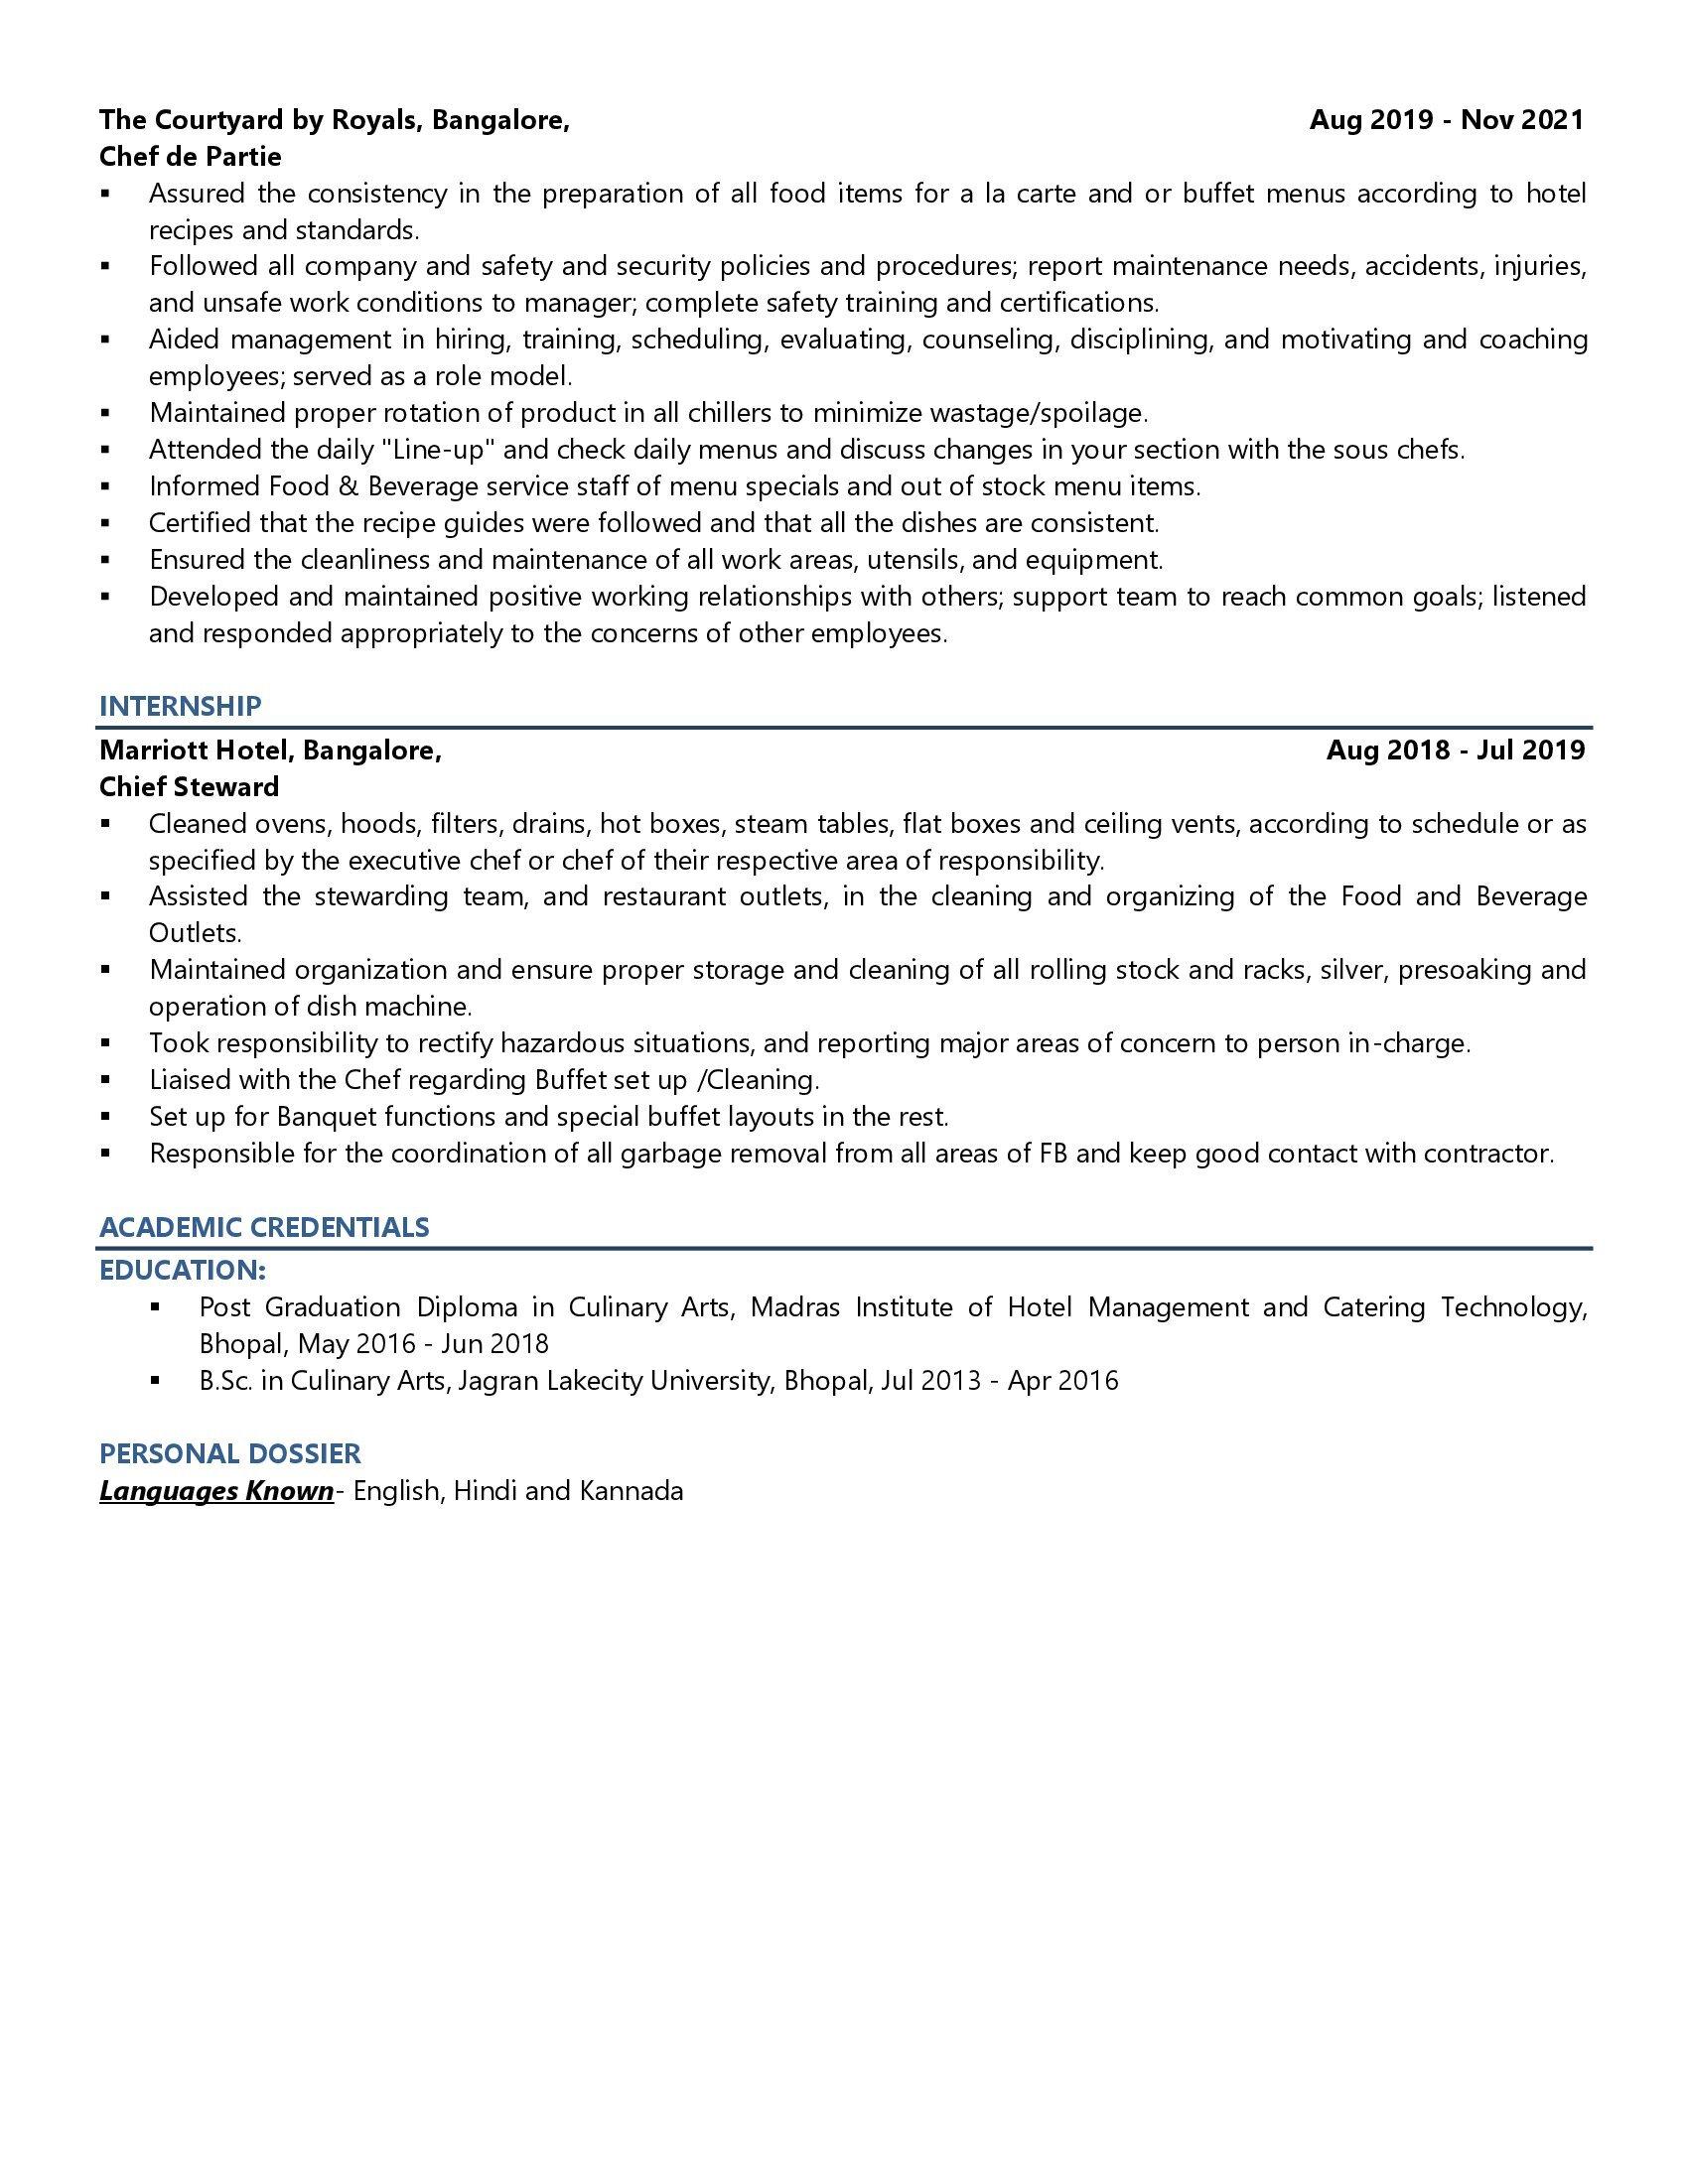 Sous Chef - Resume Example & Template